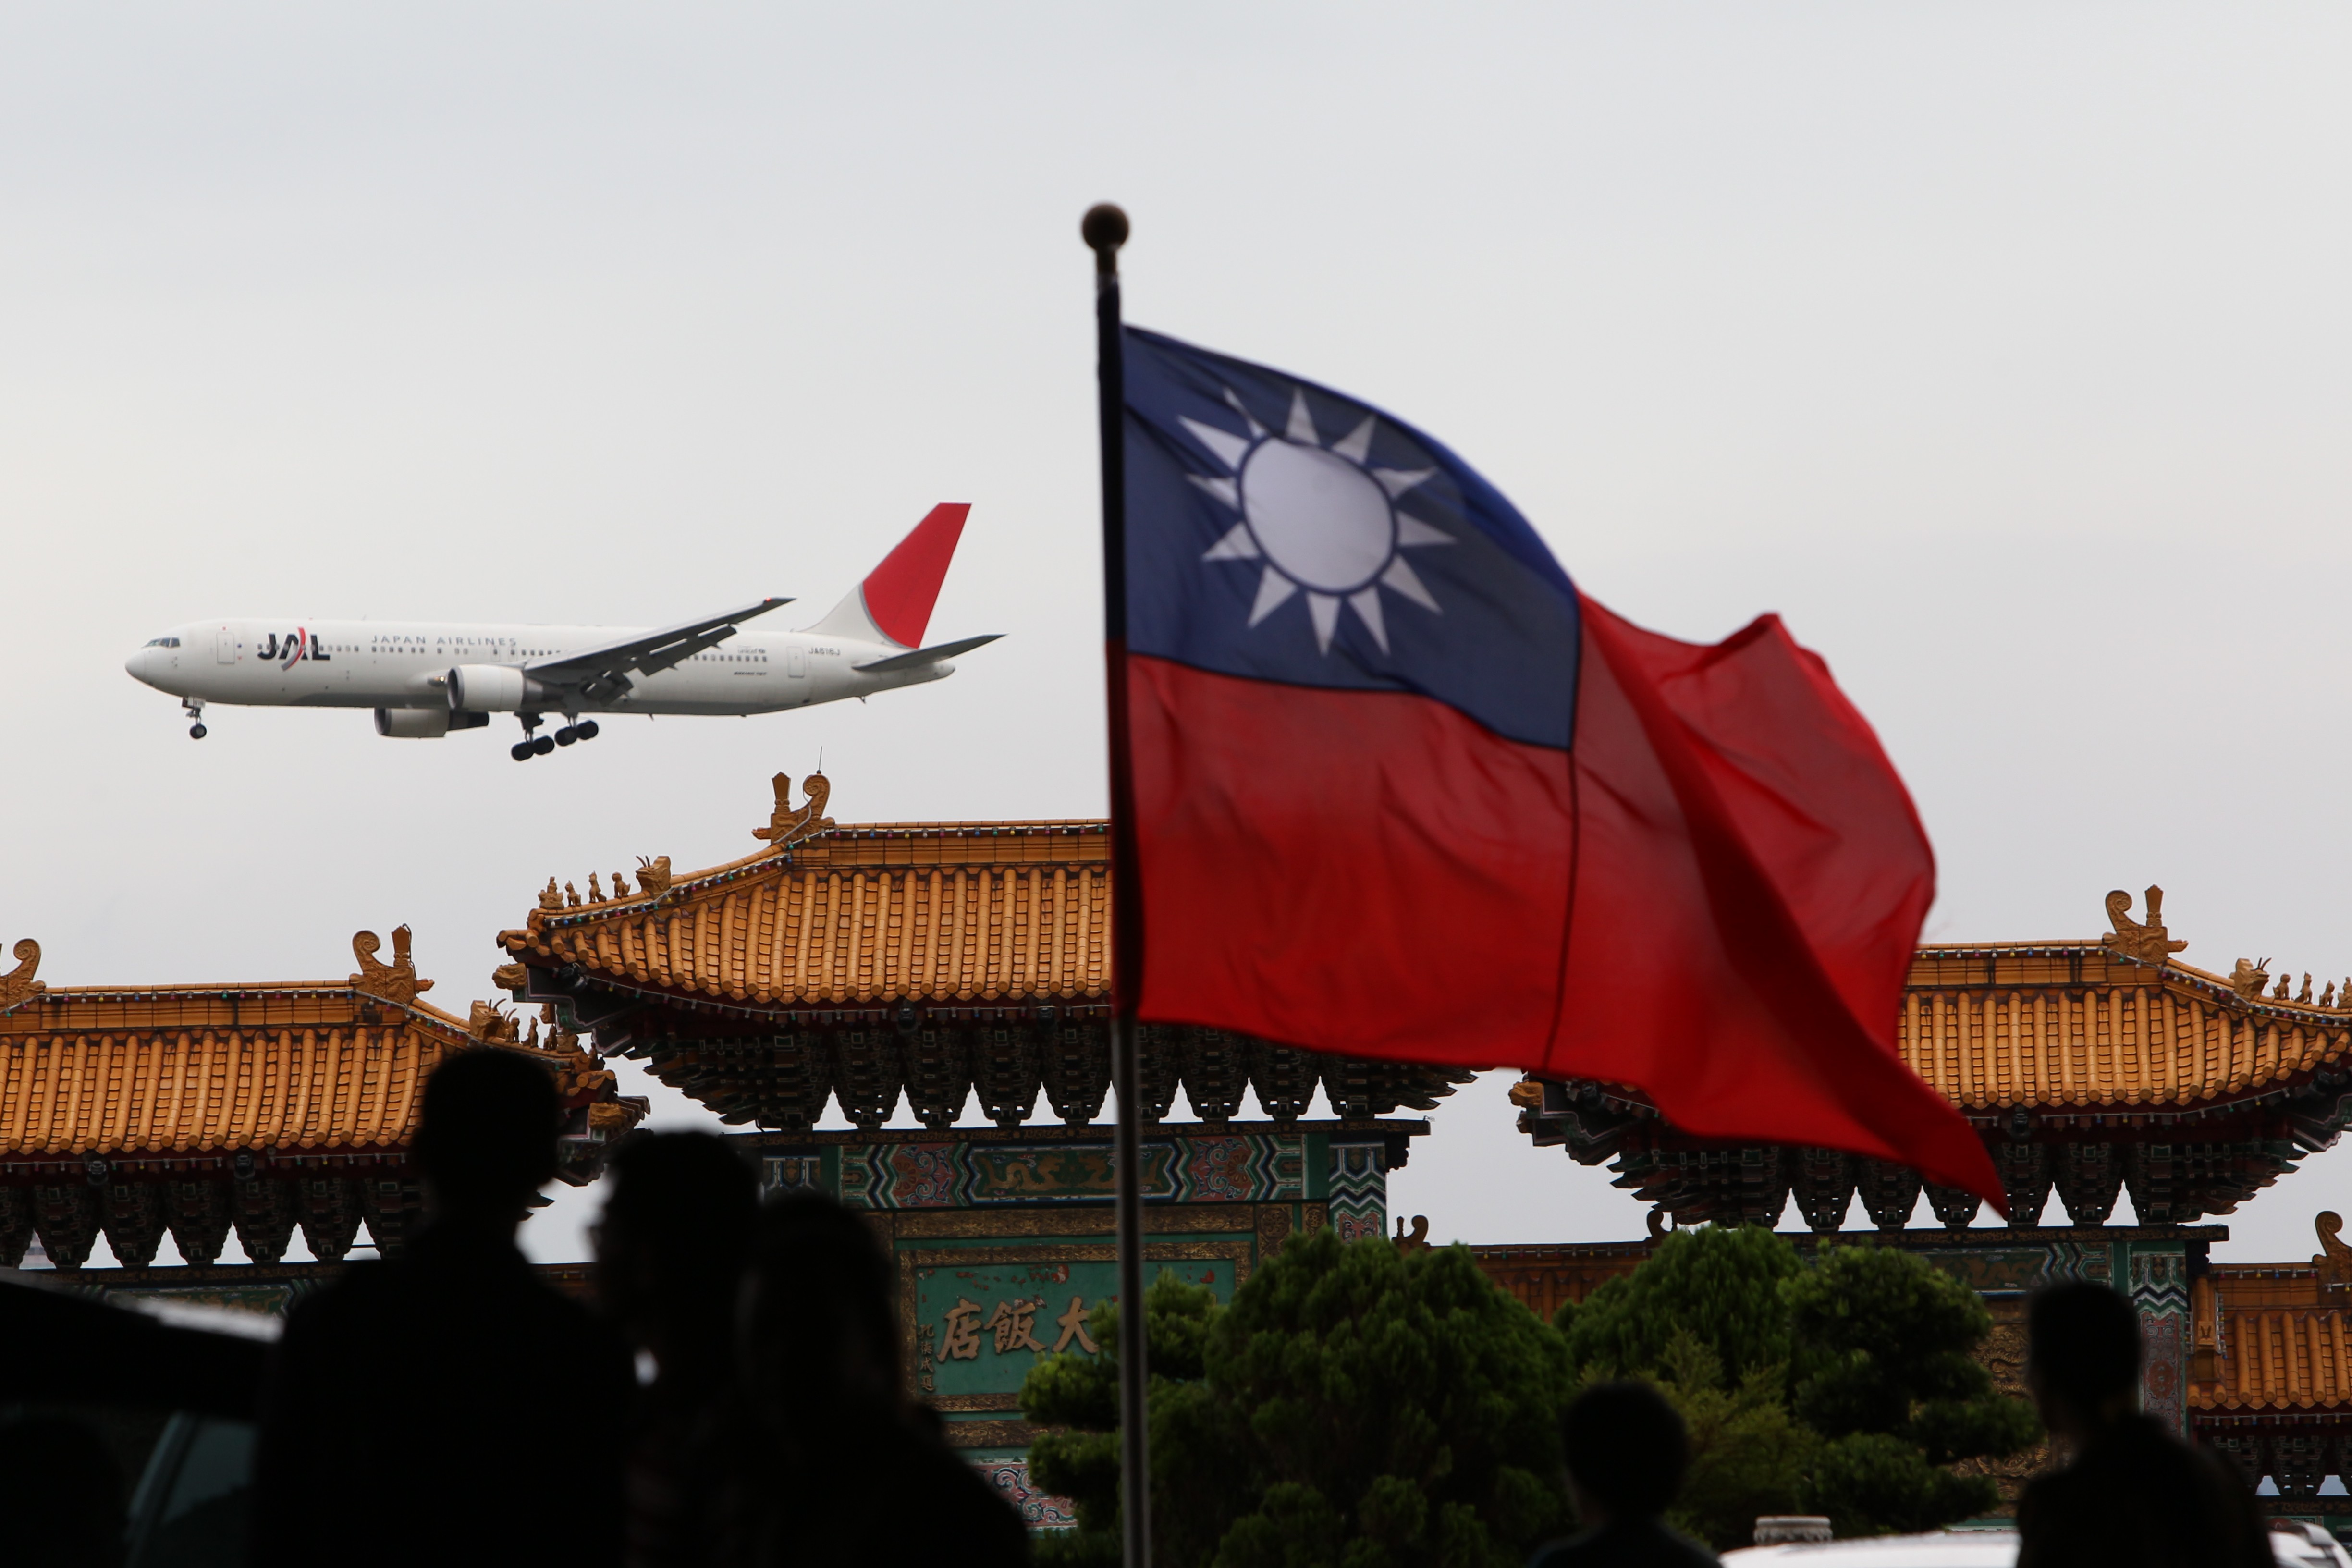 The multiple-entry visa option is intended to boost tourism and ties with Hong Kong and Macau. Photo: Felix Wong